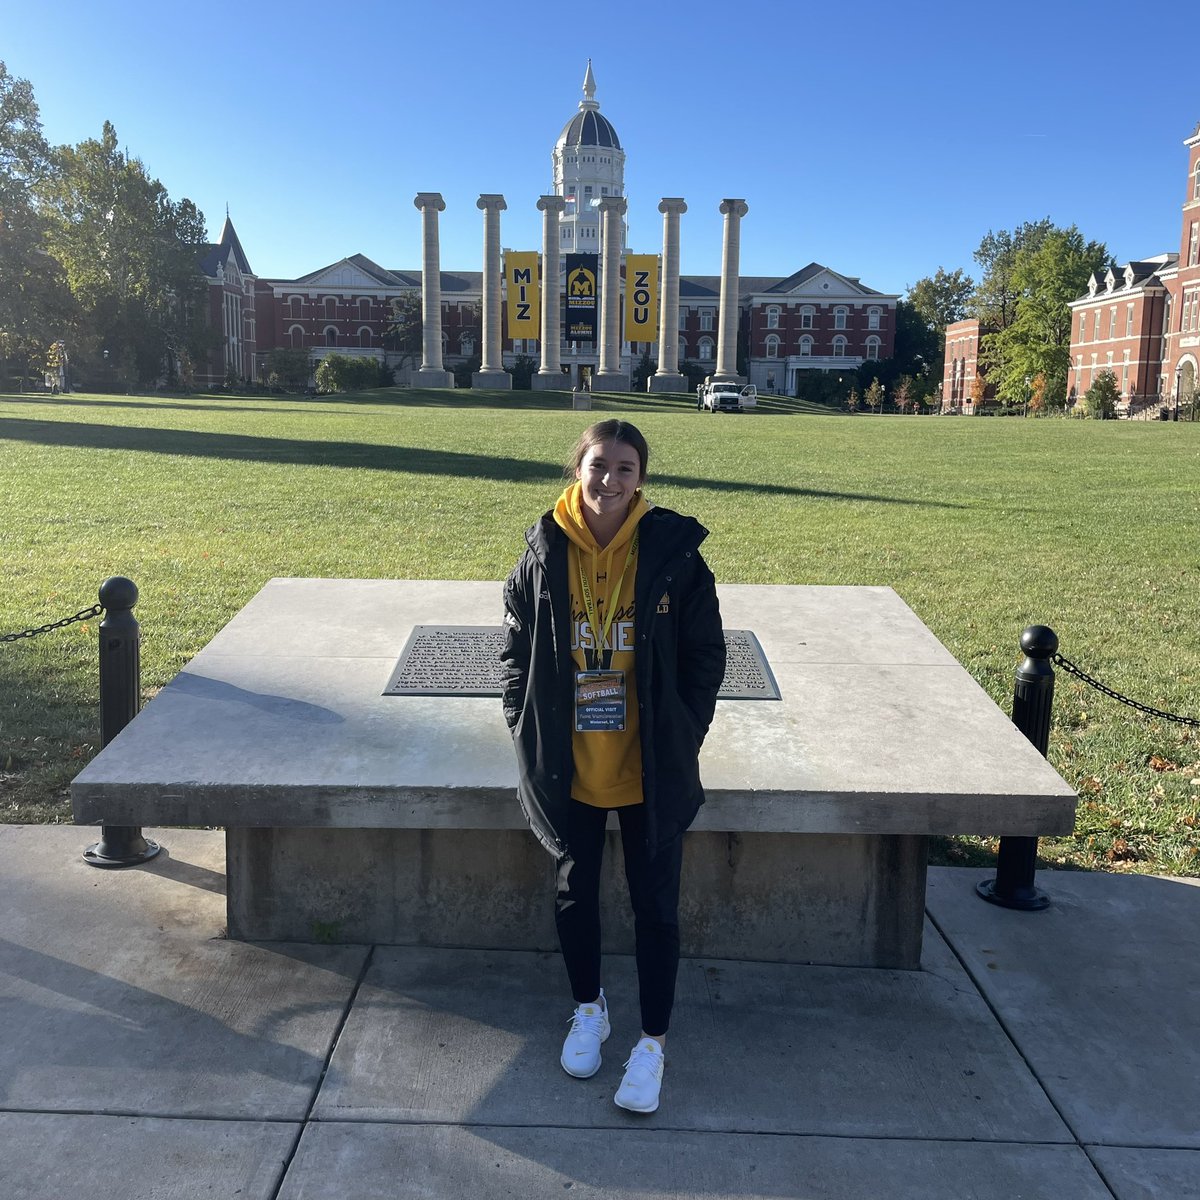 Thank you Mizzou Softball for the fun visit this weekend! Had a great time thanks to @CoachLarissaA @coachMarino11 and the rest of the staff. #OwnIt